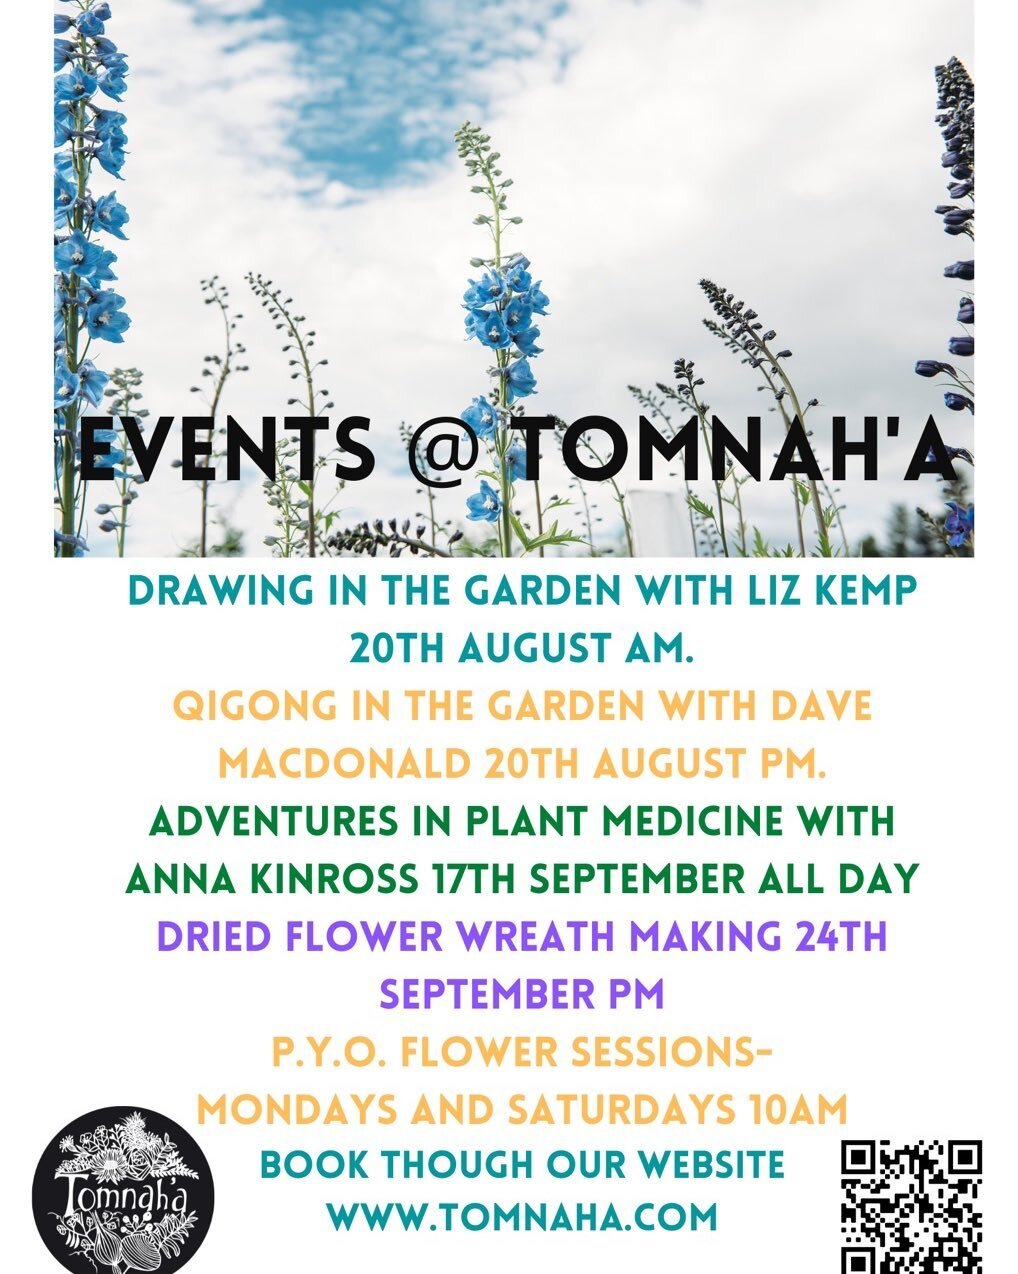 The next two months of workshops happening here @TomnahaMarketGarden your in for a treat!! You can book through our website- link in our bio #tomnahamarketgarden #marketgardening #qigong #drawinginnature #autumnwreathmaking @tomnahaflowers #pickyouro